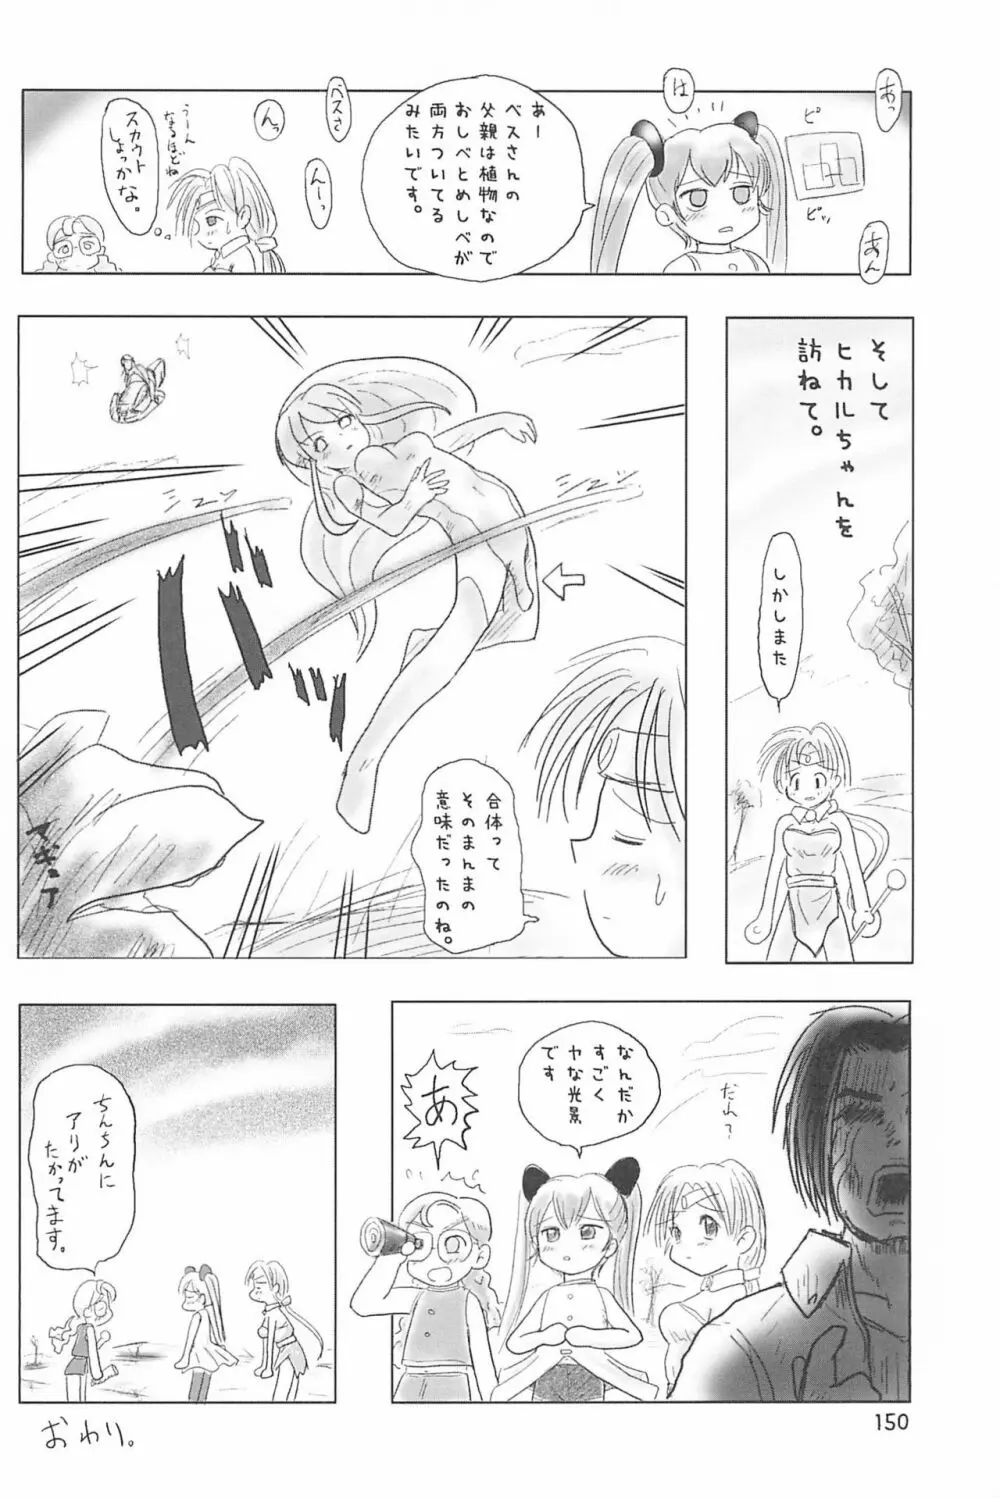 ND-special Volume 4 150ページ